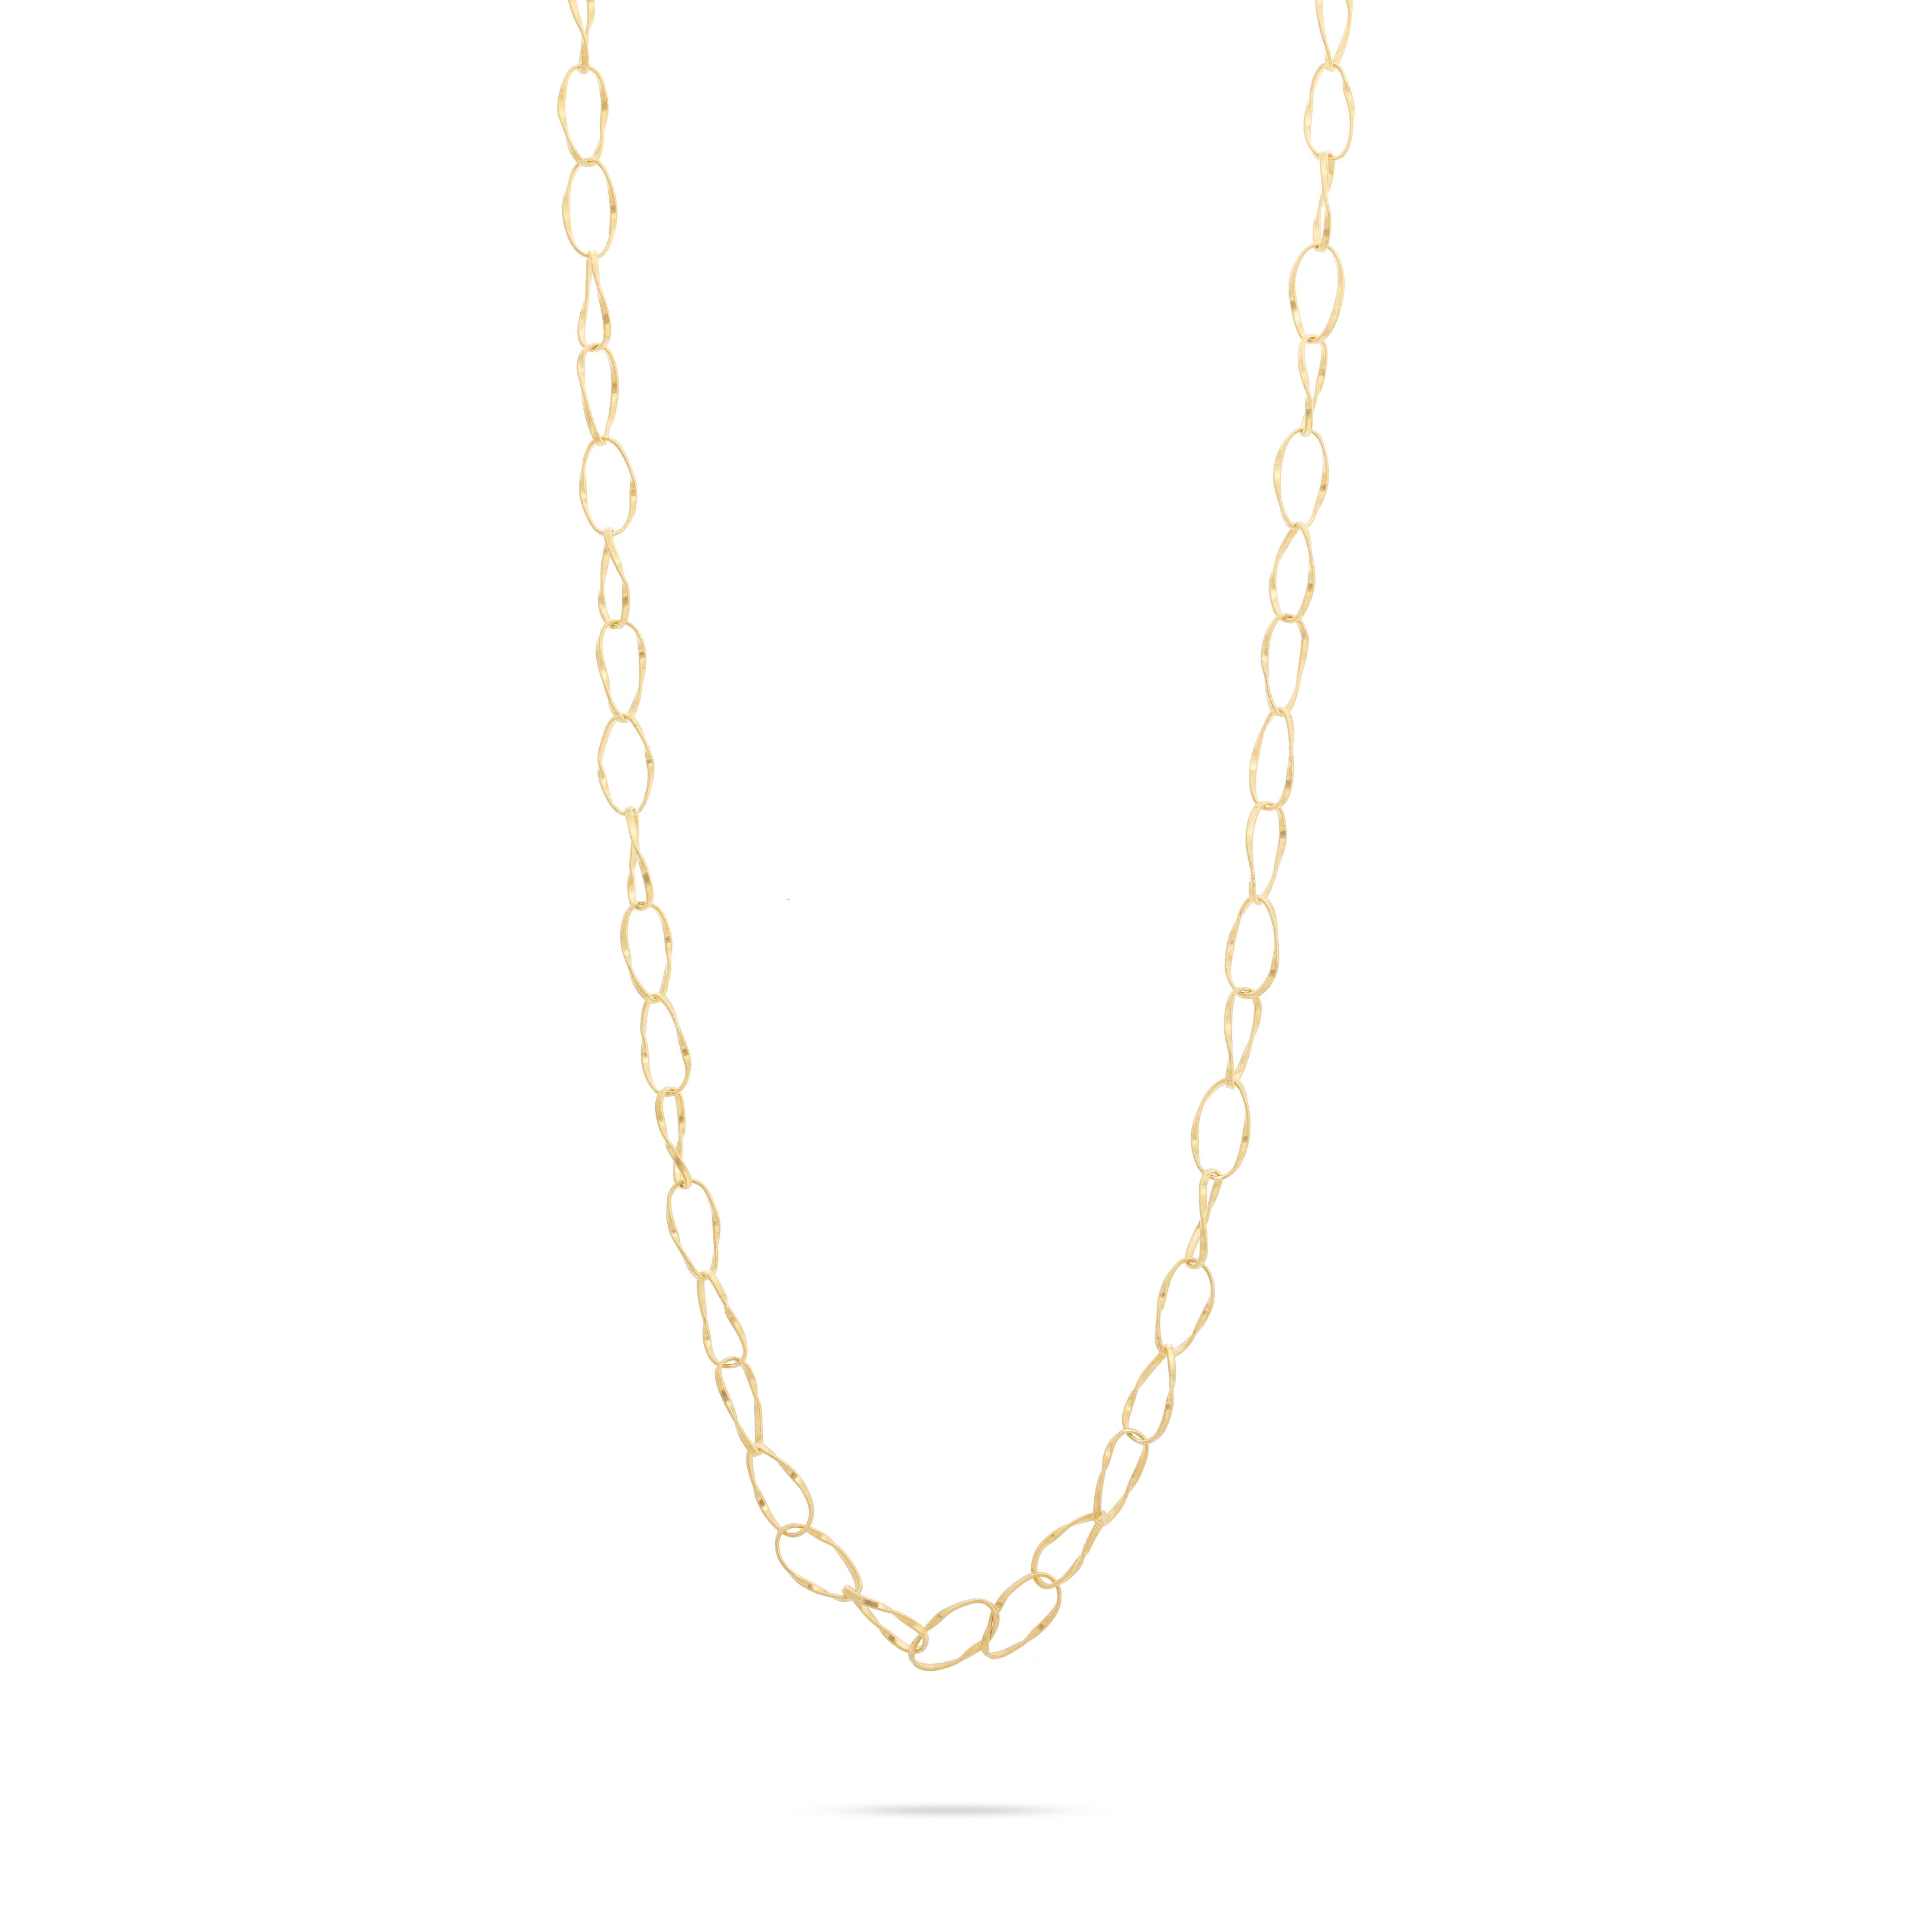 18K YELLOW GOLD LONG LINK NECKLACE FROM THE MARRAKECH ONDE COLLECTION